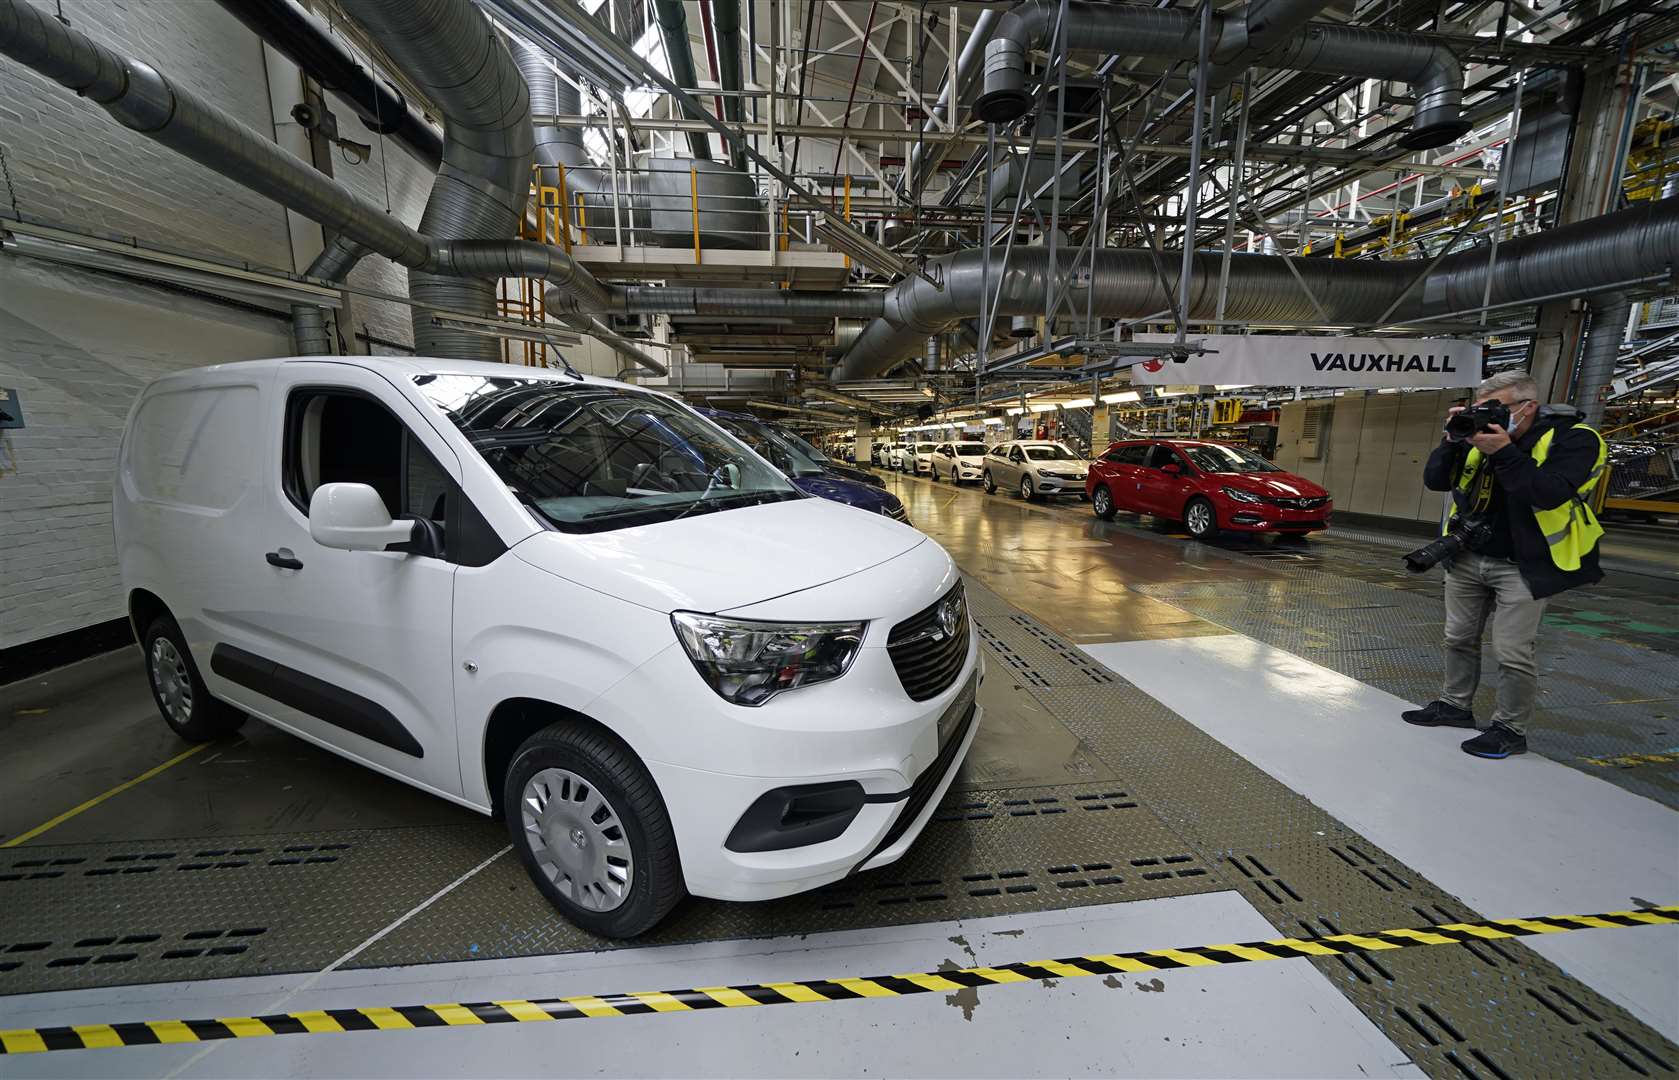 Production of electric vans started at Stellantis’s plant in Ellesmere Port, Cheshire, last week (Peter Byrne/PA)